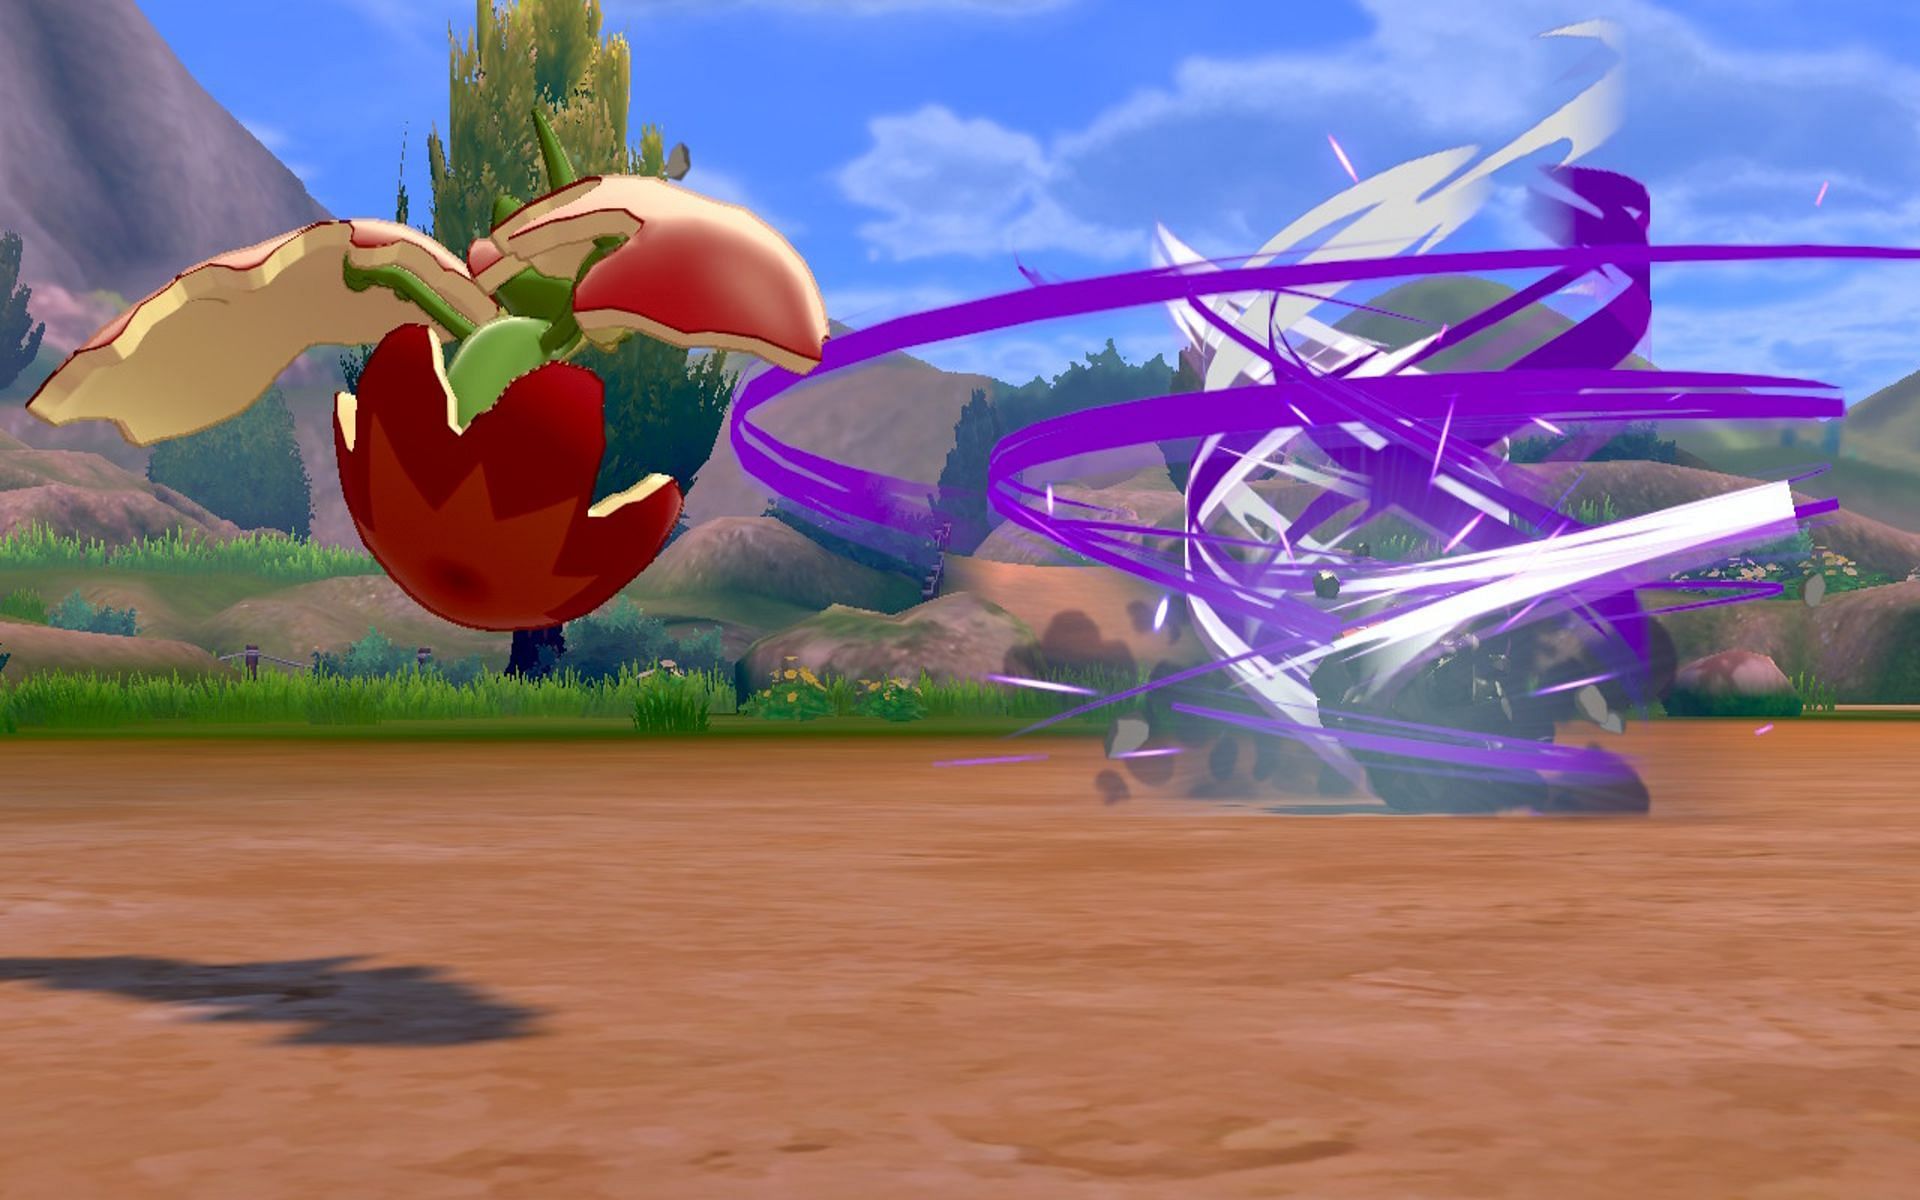 Twister is the weakest Dragon-type charge move (Image via Game Freak)